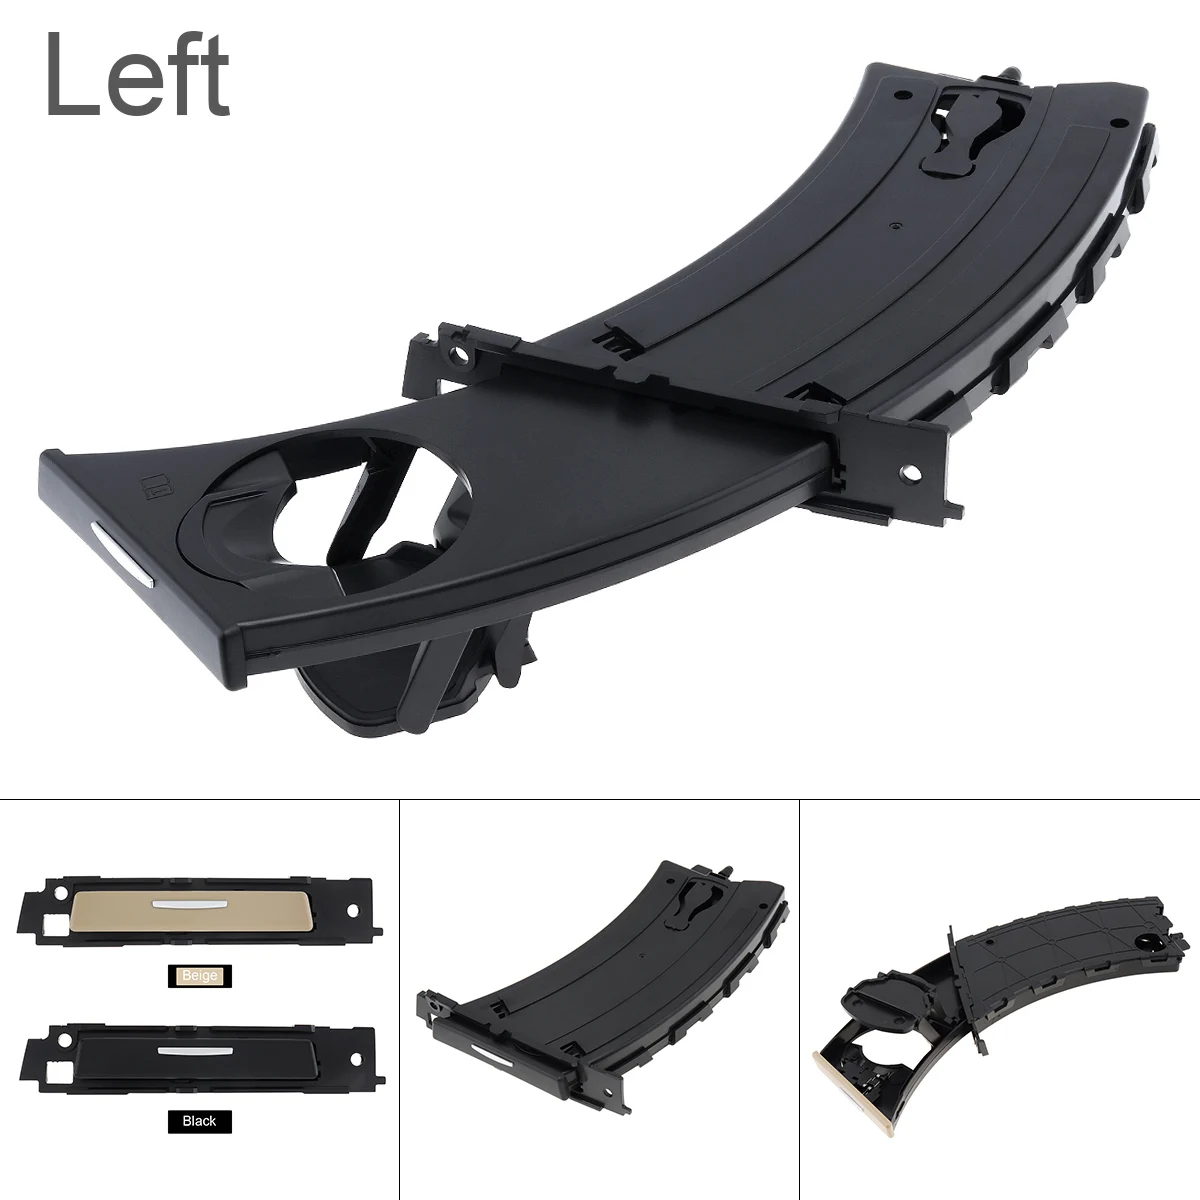 

Dashboard Cup Holder Front LHD Models Fit for BMW E90 E91 E92 E93 325i 325xi 328i 328xi 330i 330xi 335d 335i 335i3 335xi M3